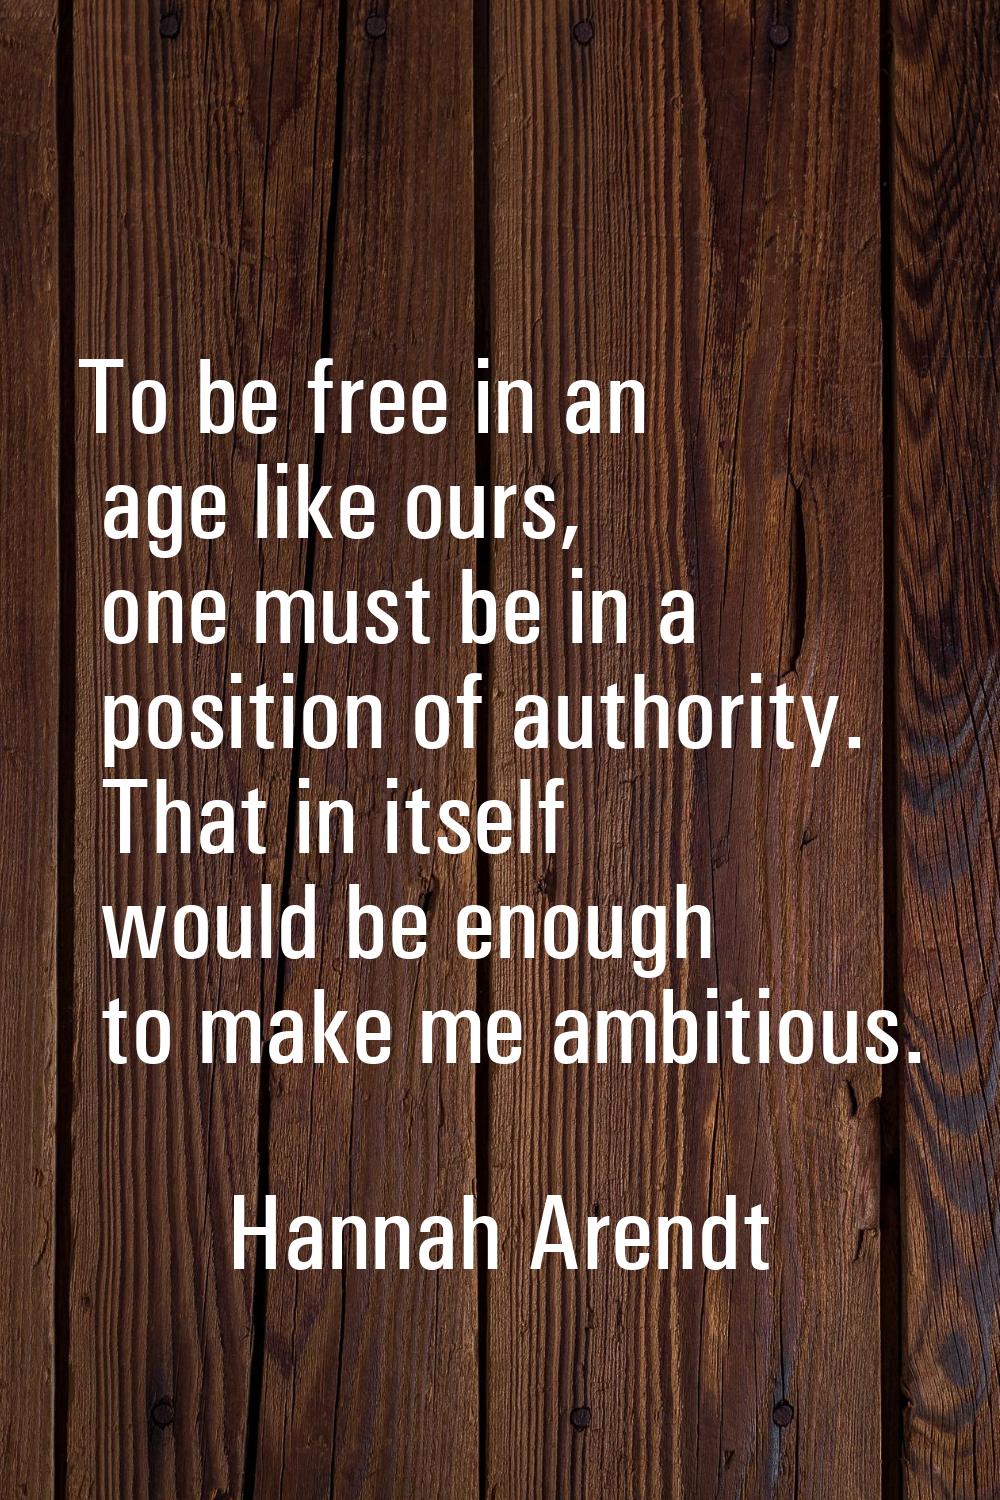 To be free in an age like ours, one must be in a position of authority. That in itself would be eno